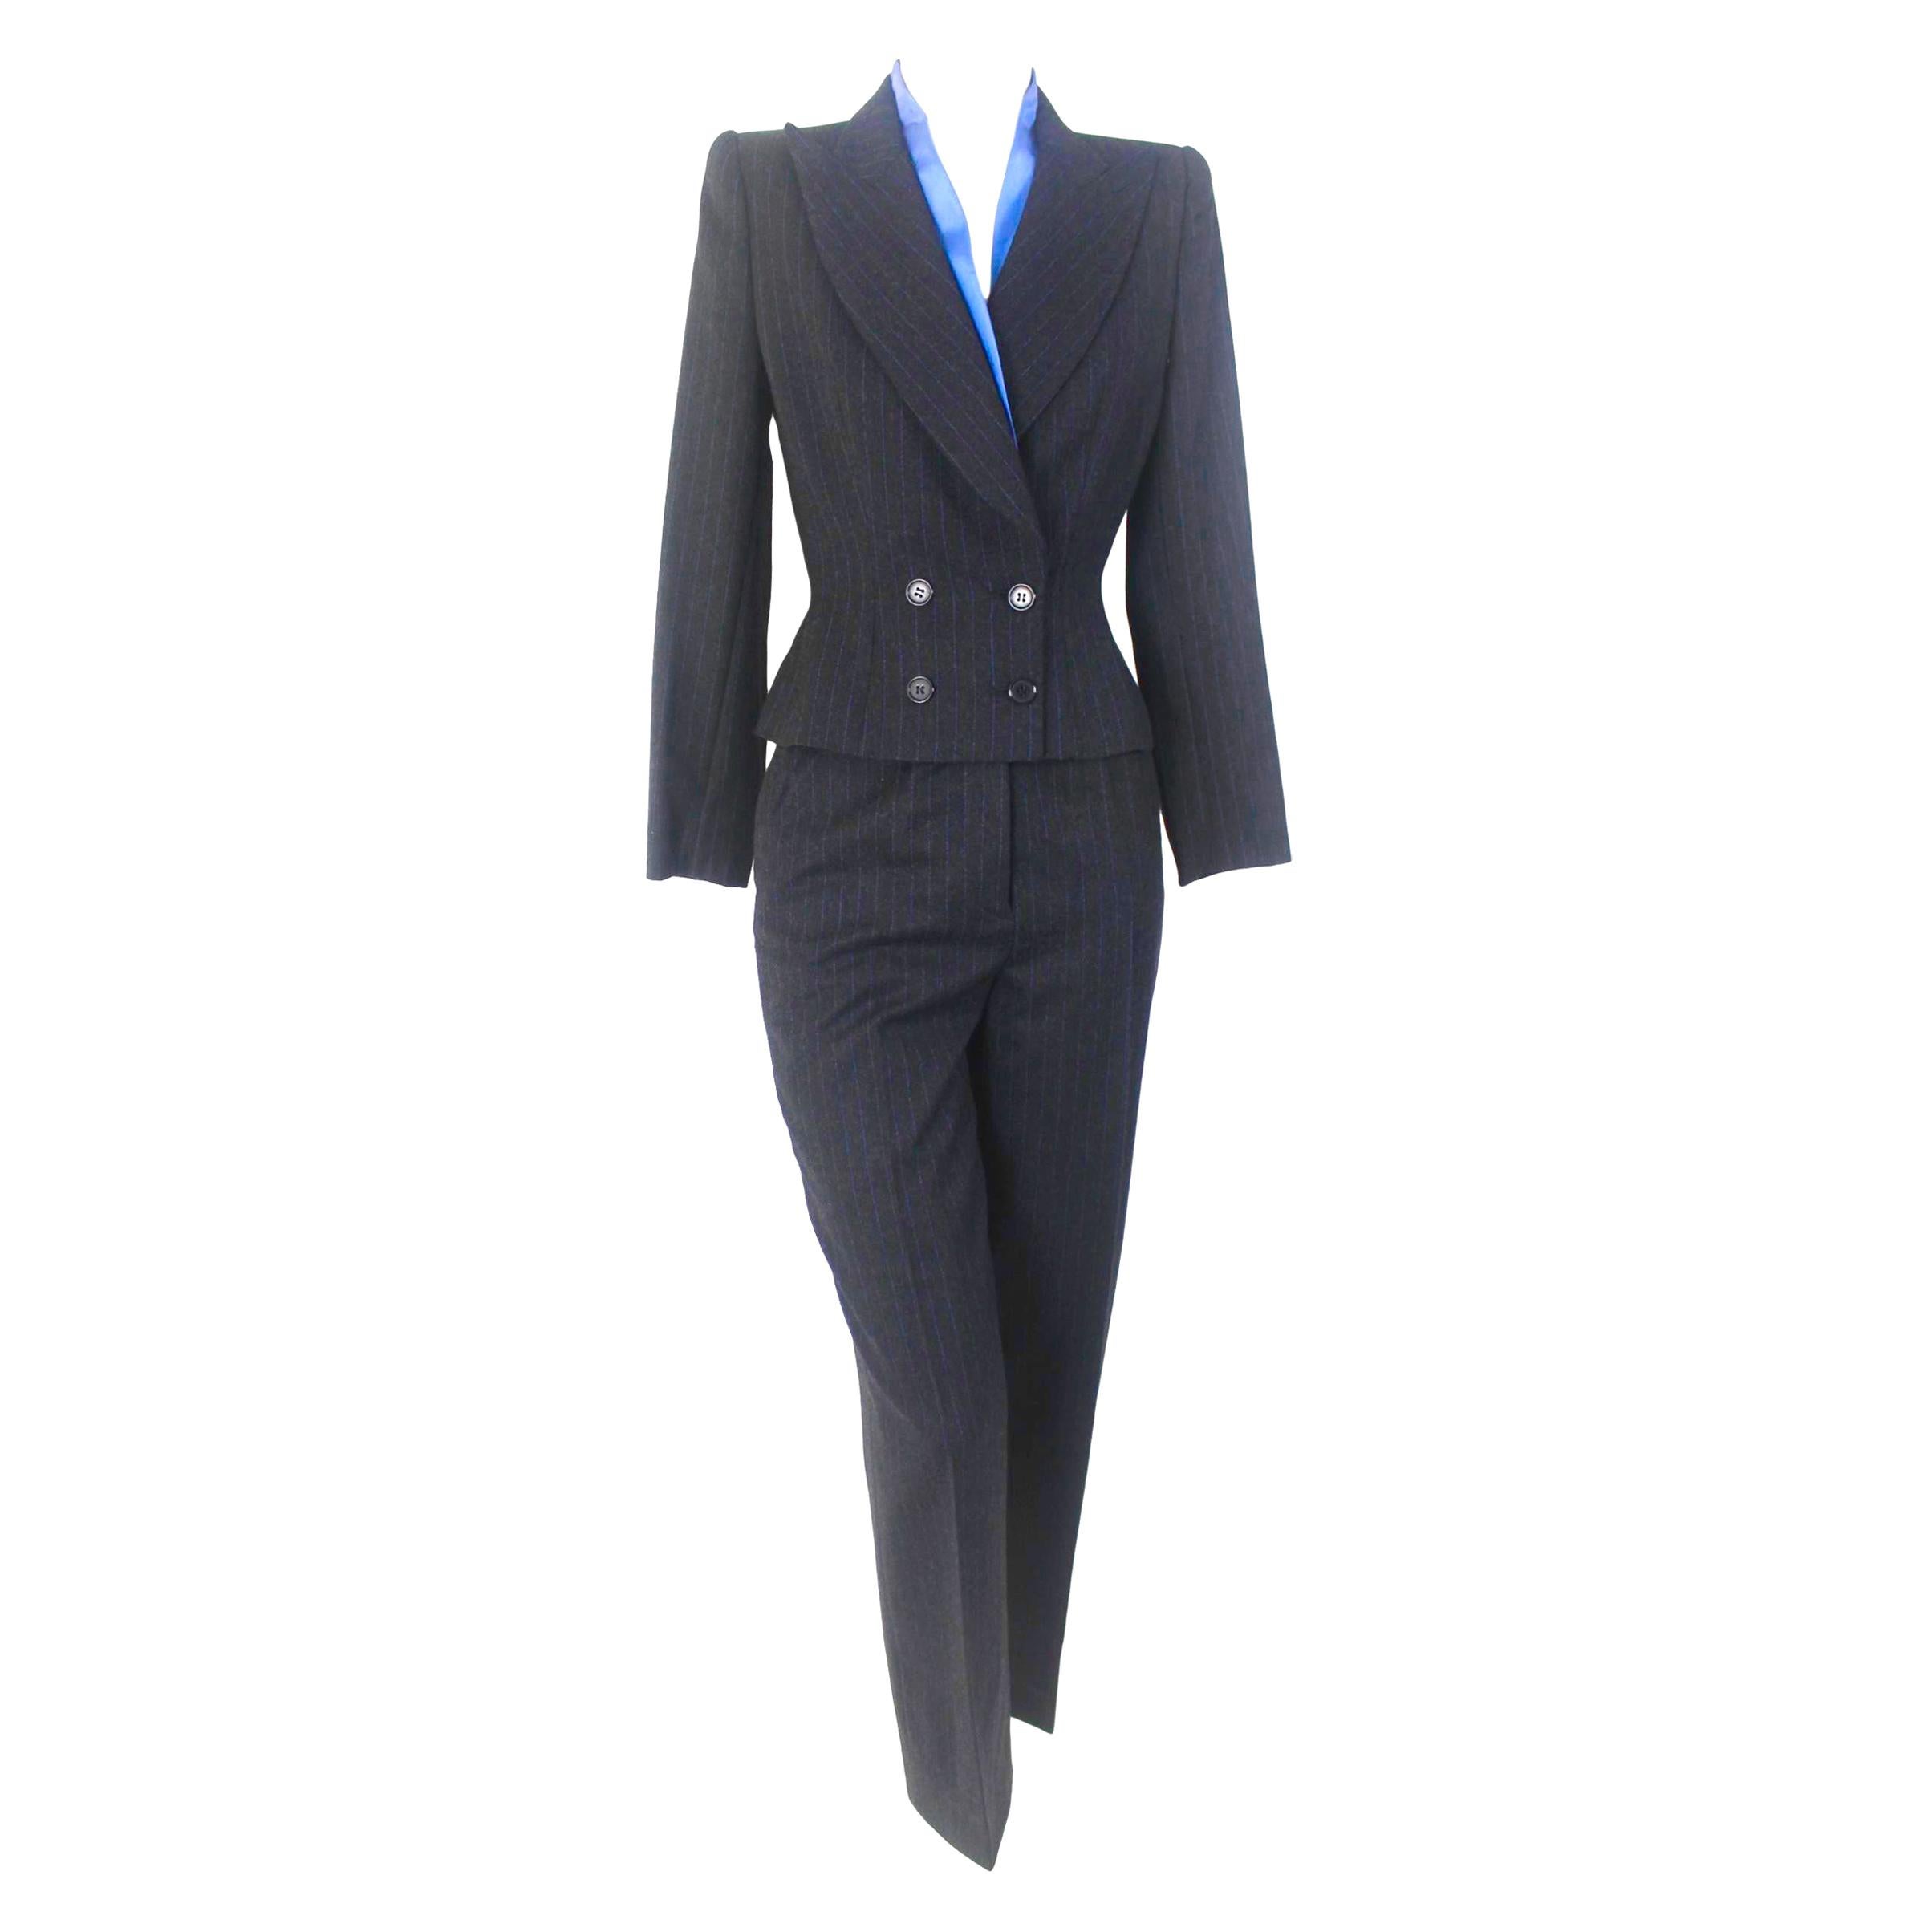 Alexander McQueen Pinstripe Blue Satin Lined Suit Fall 1997 Collection